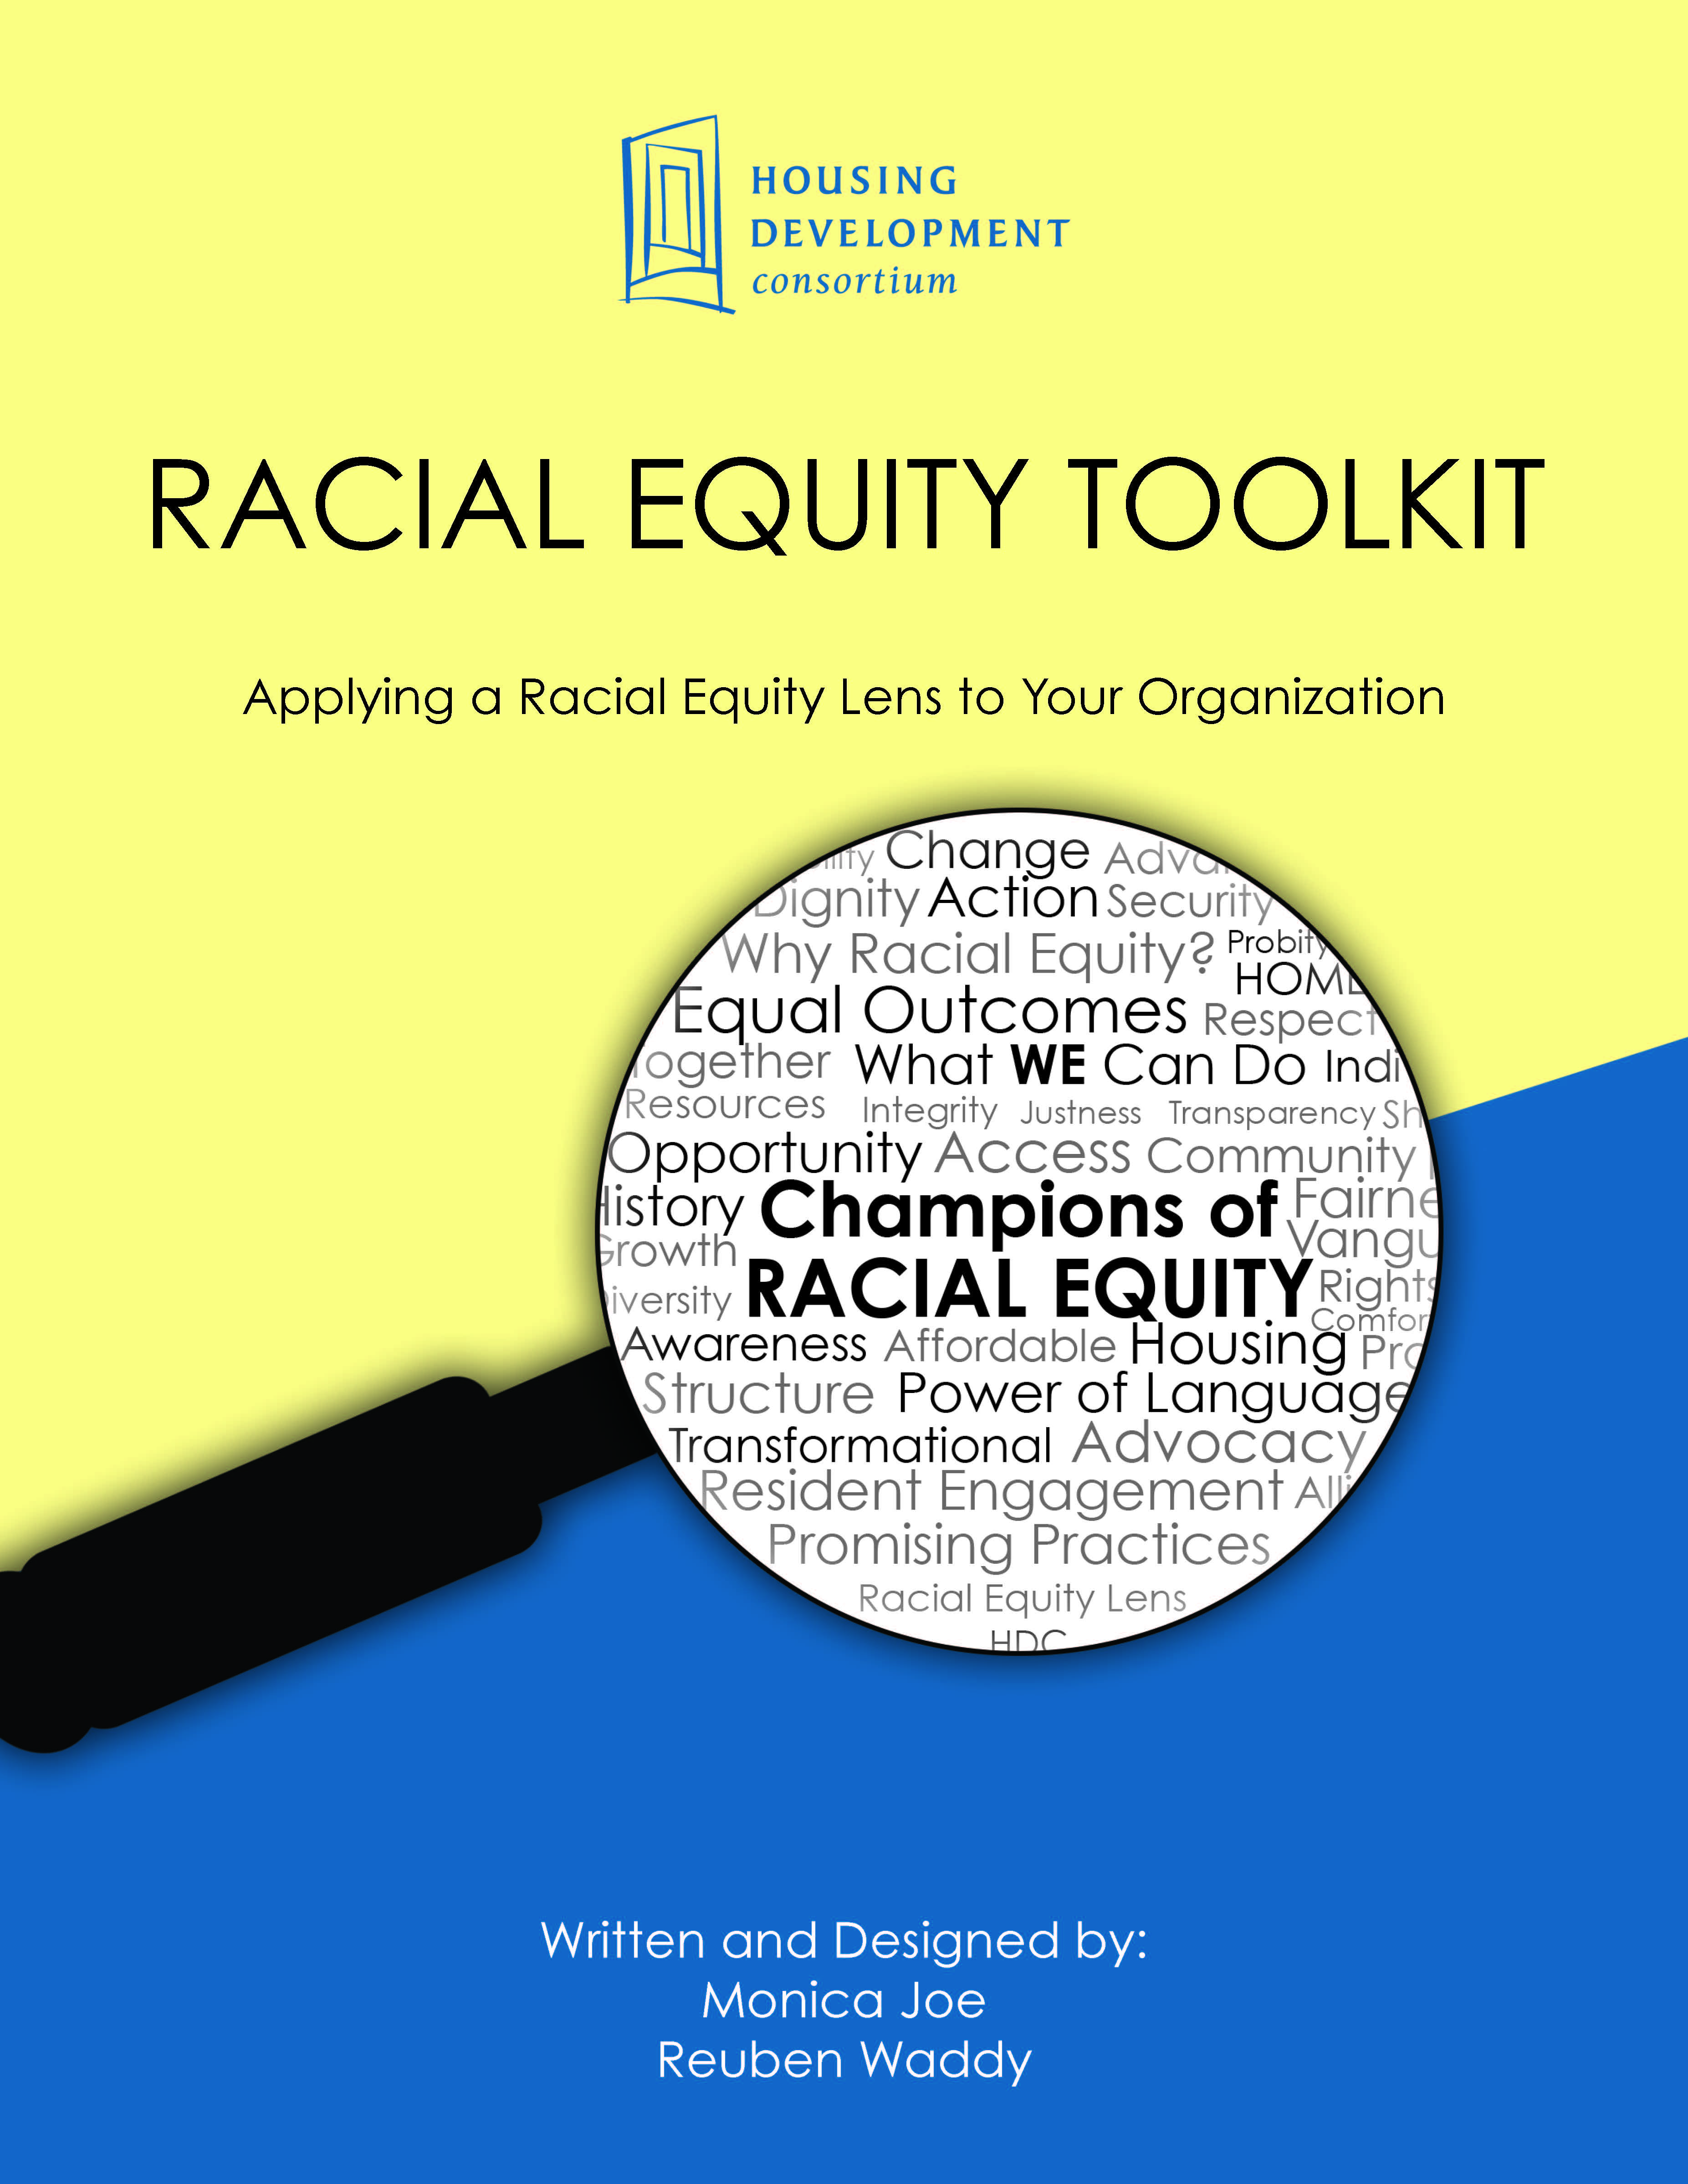 Race Equity And Inclusion Housing Development Consortium